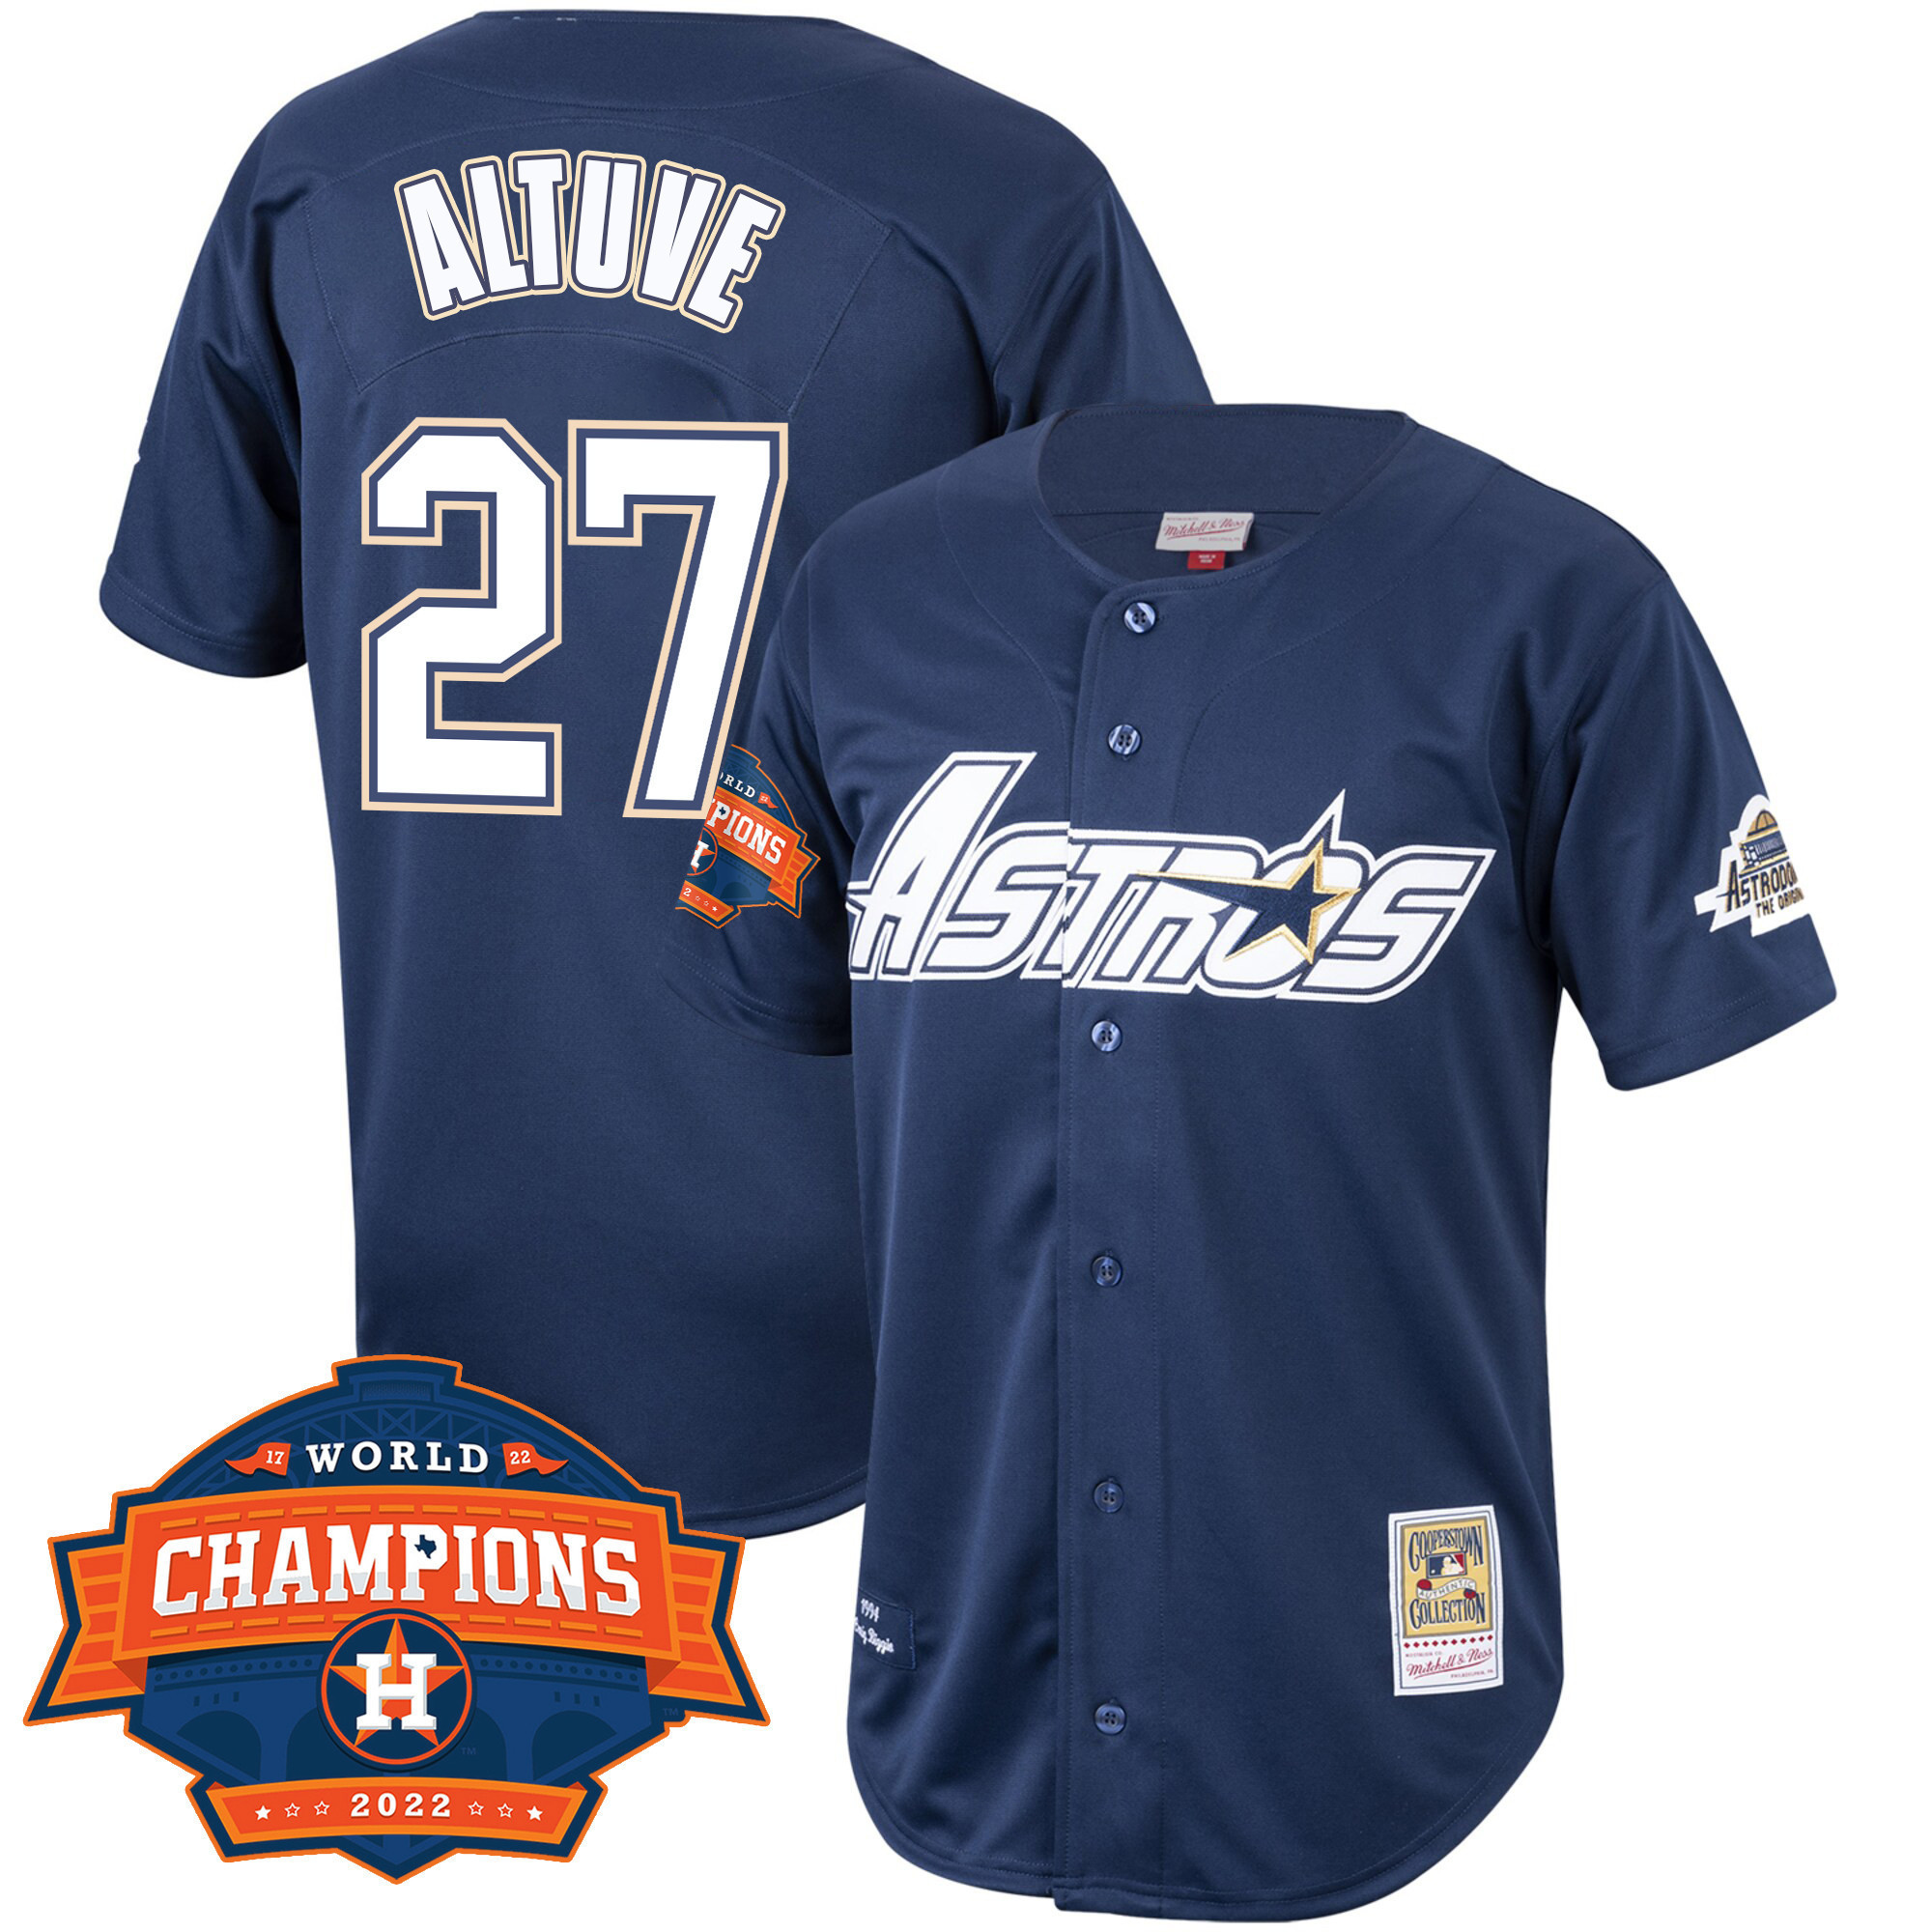 astros limited edition jersey